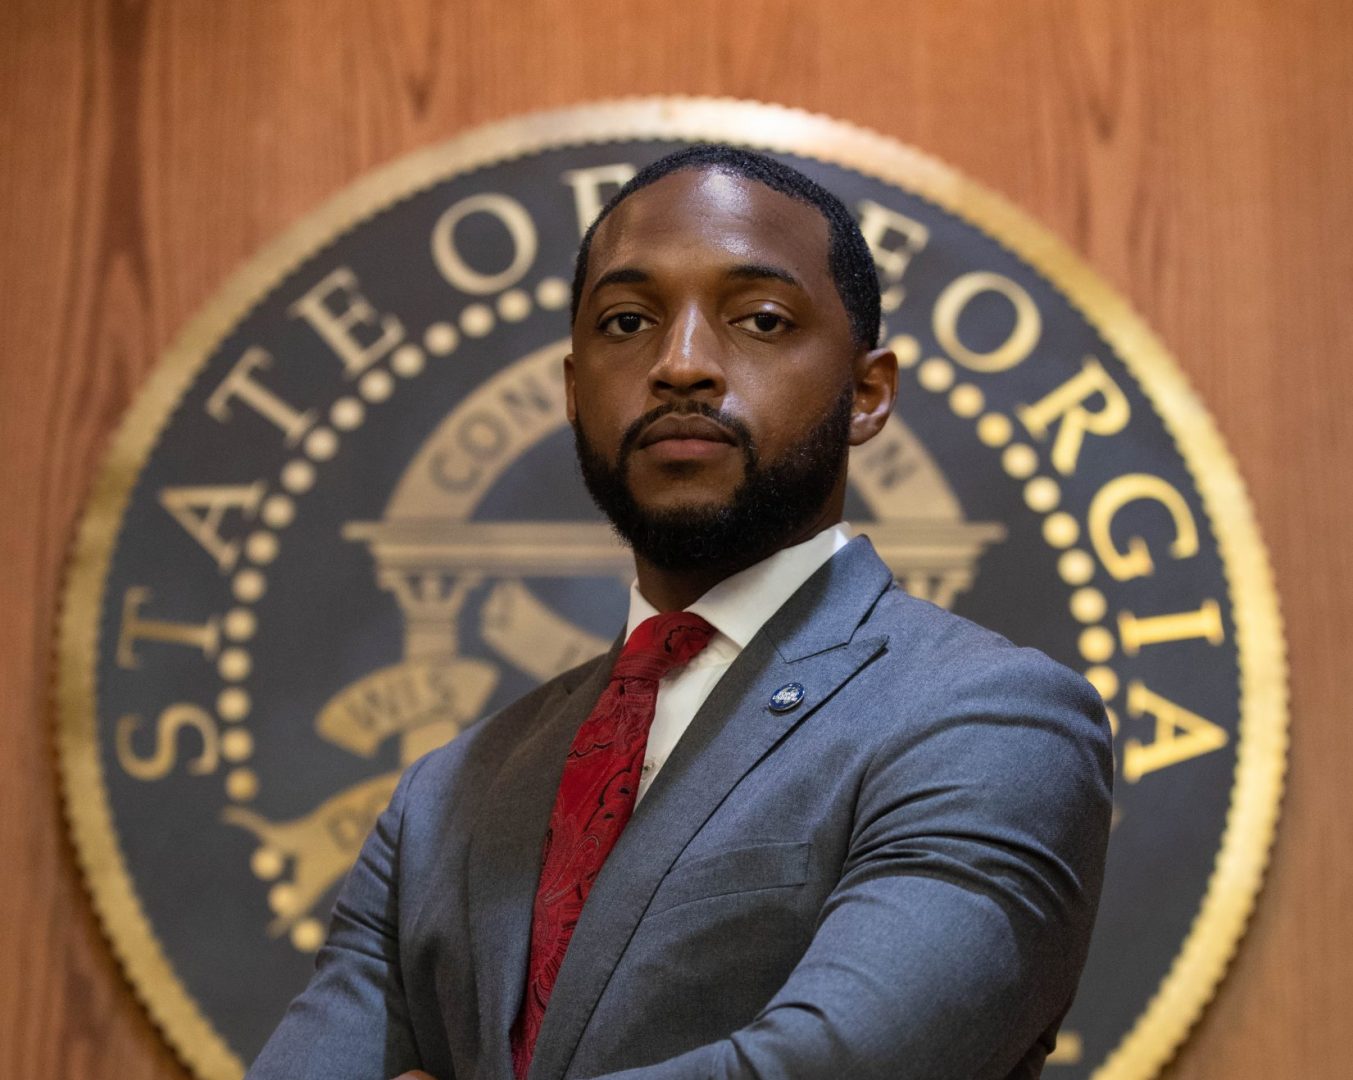 Attorney Keith Lamar Jr. explains why having a strong moral compass is key